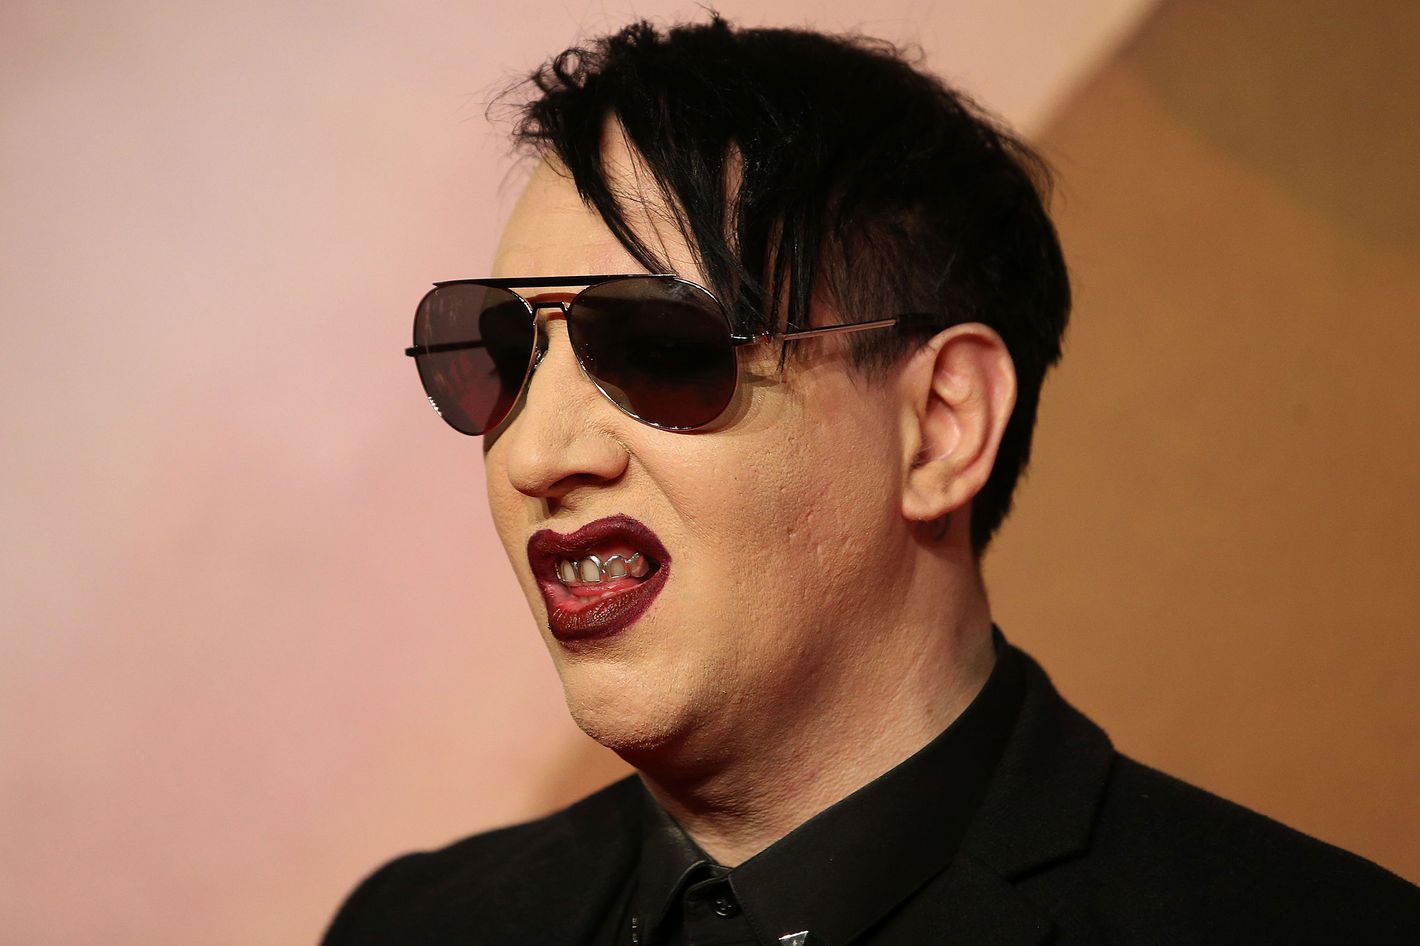 The Love Song of Marilyn Manson